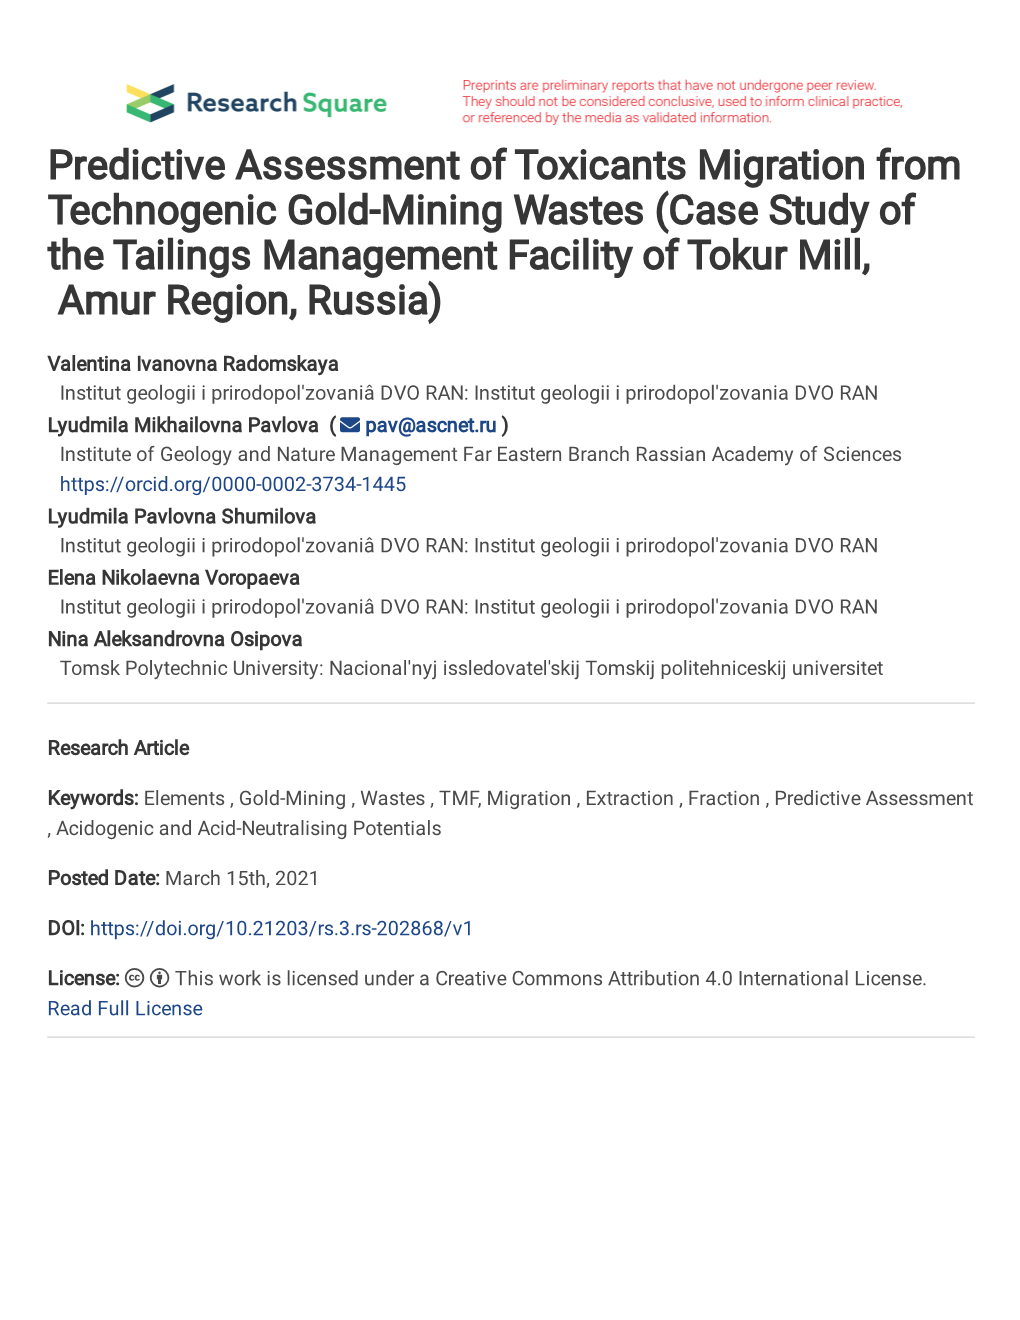 Predictive Assessment of Toxicants Migration from Technogenic Gold-Mining Wastes (Case Study of the Tailings Management Facility of Tokur Mill, Amur Region, Russia)